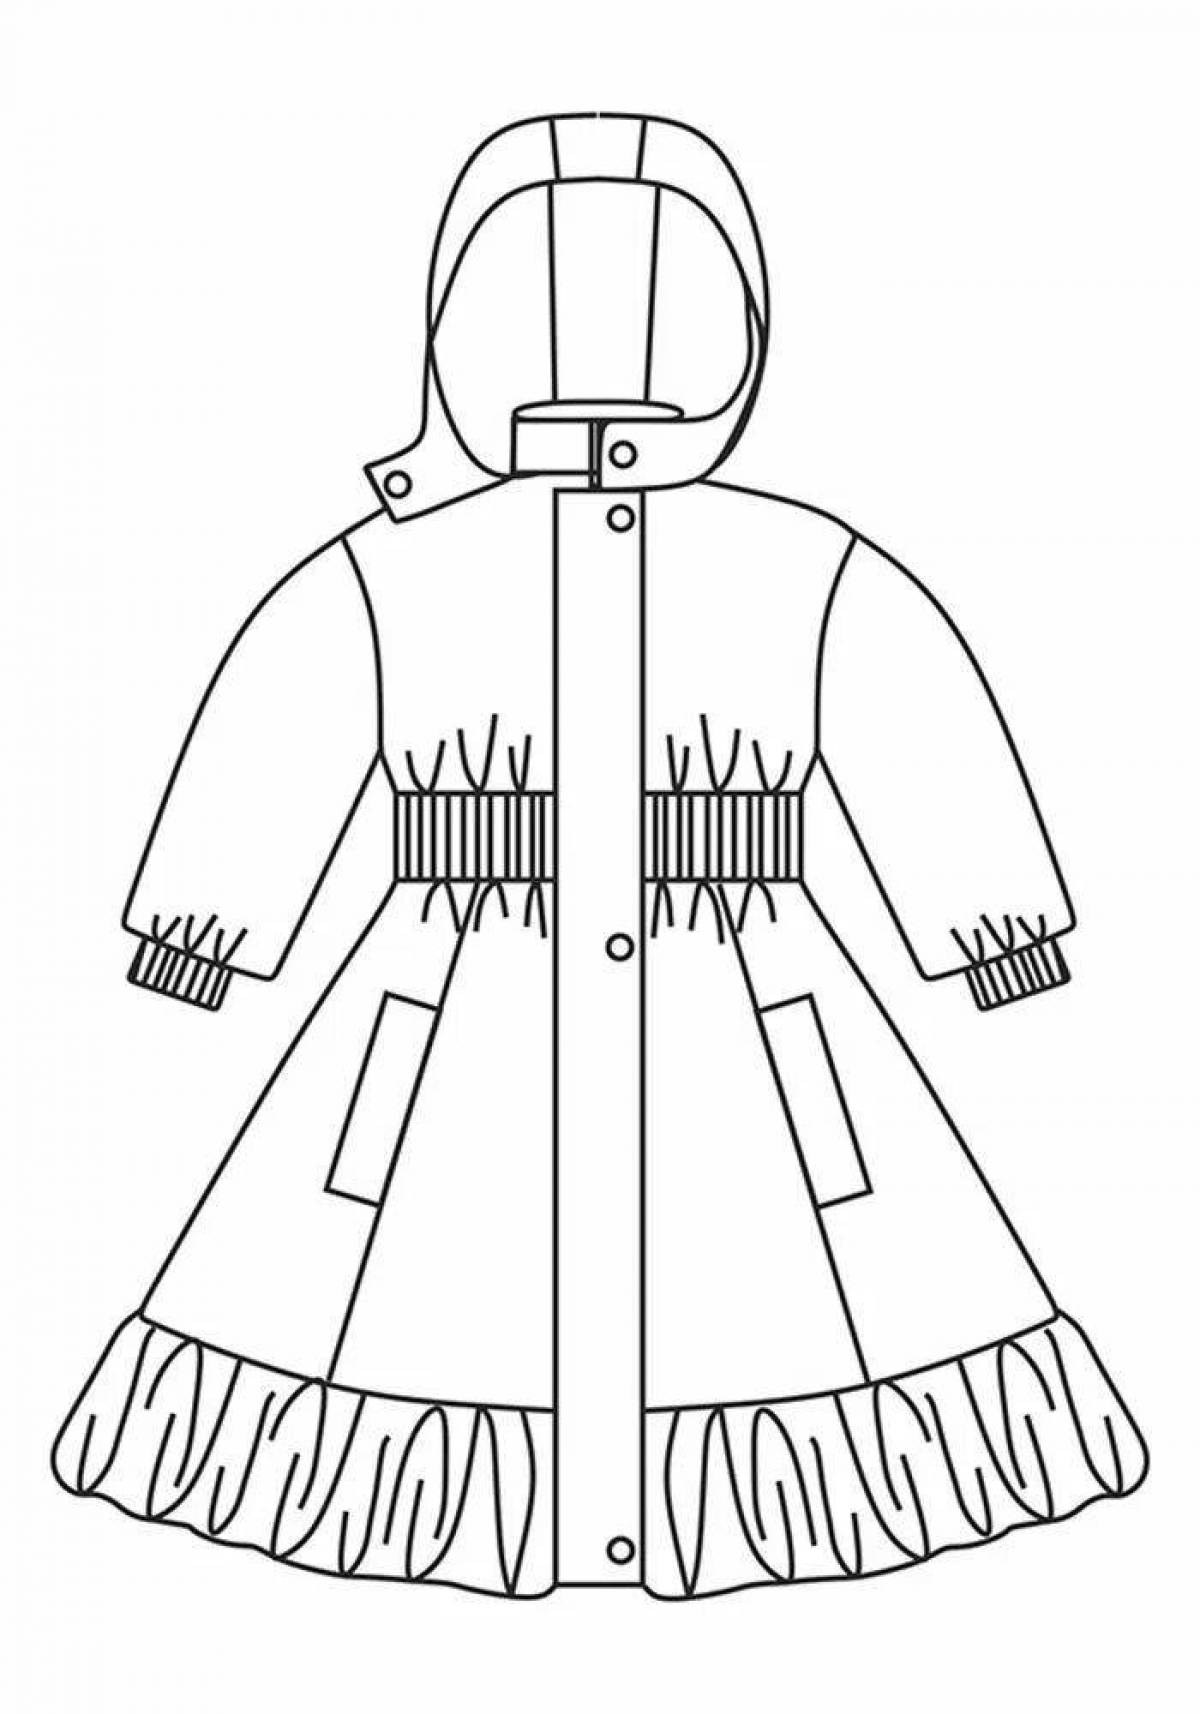 Adorable coat coloring page for kids